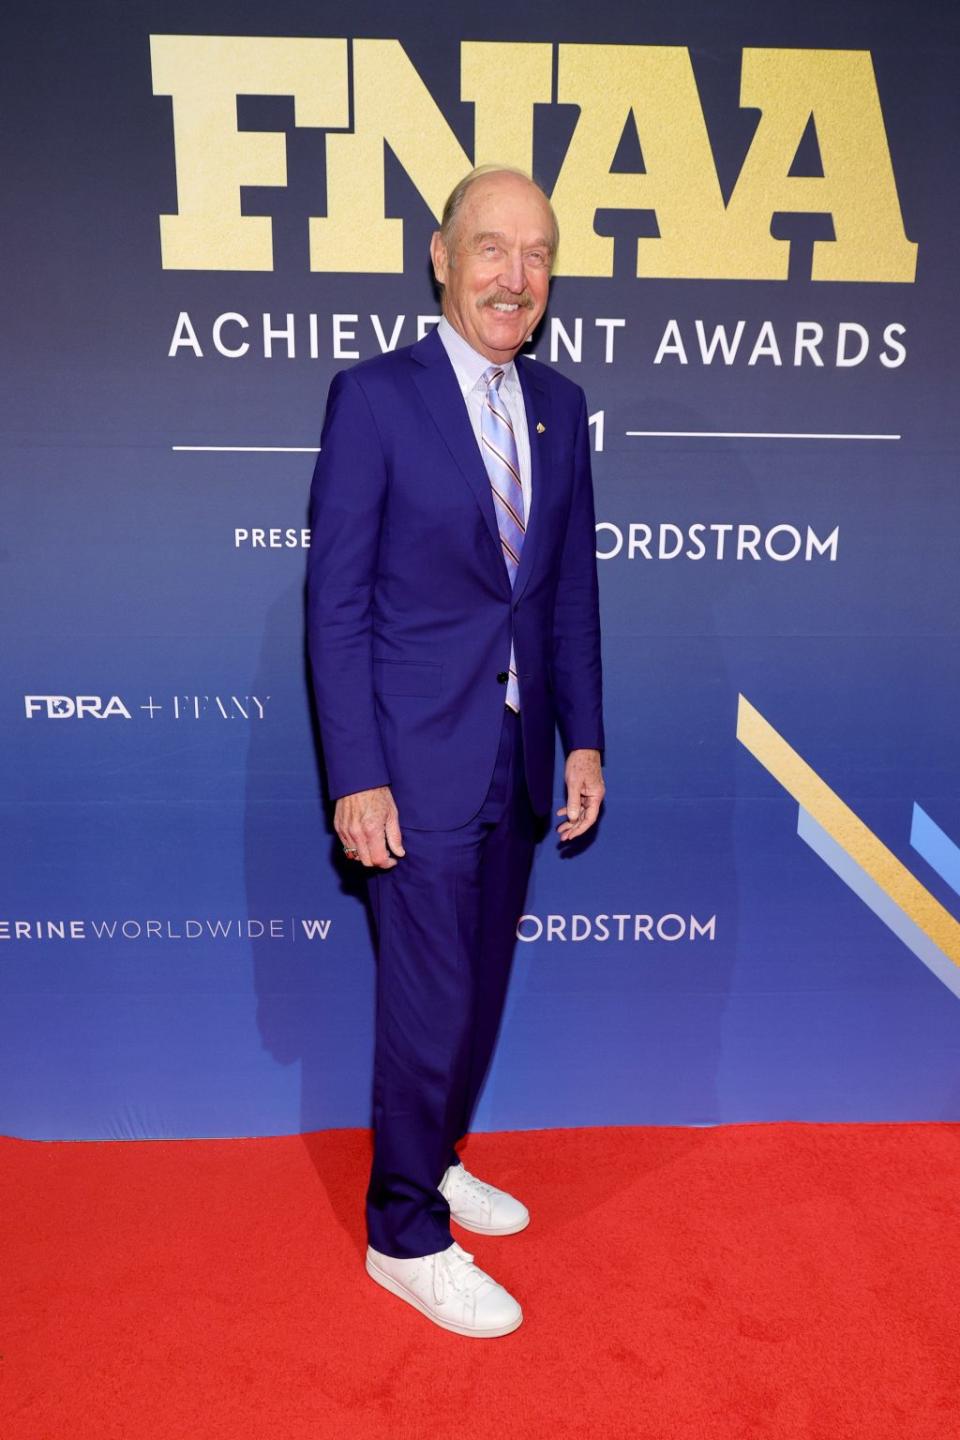 Former tennis player, Stan Smith attends the 35th Annual Footwear News Achievement Awards on November 30, 2021 in New York City.  - Credit: Getty Images for Footwear News